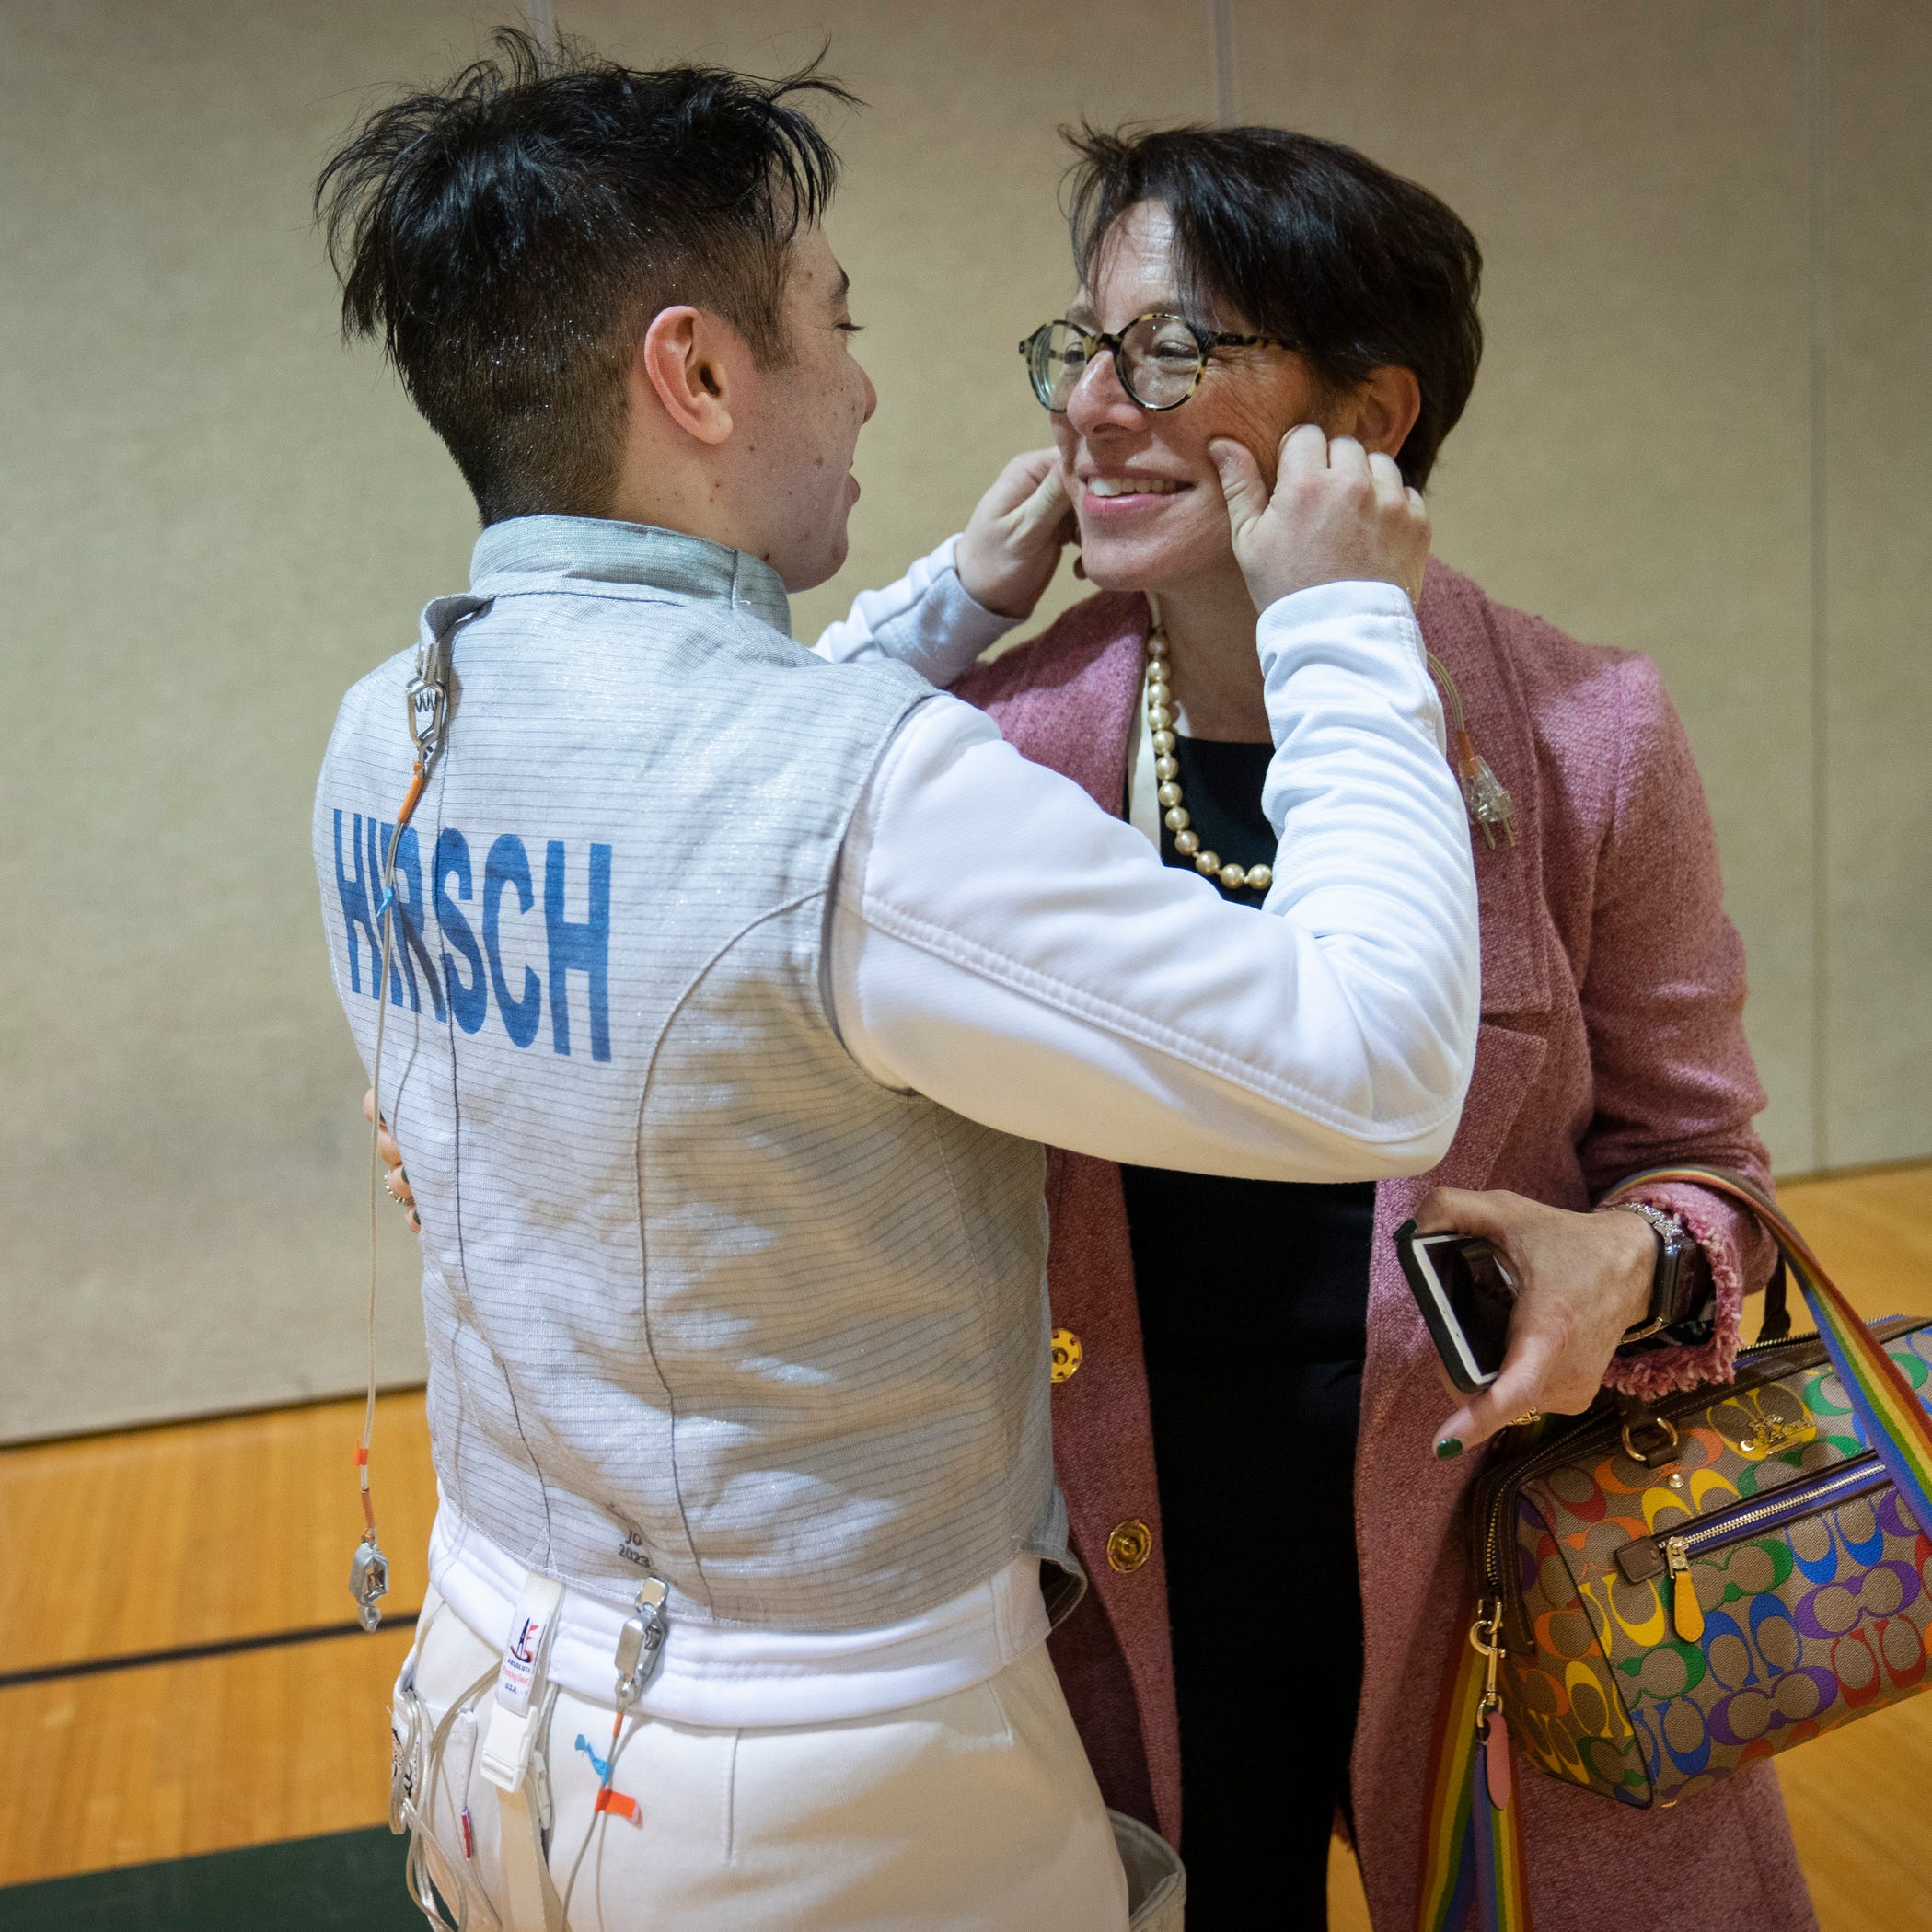 Bobbie Hirsch, 19, a biology major from Huntington Woods, left, pinches his mother, Lauren Hirsch's cheeks in between practices with his Wayne State fencing teammates Tuesday, March 21, 2023 in the Wayne State University Matthaei Center. Hirsch, a transgender man, joked about his mother's pride-themed Coach purse Òshe insisted on buying something that screamed ally as the two shared a laugh.